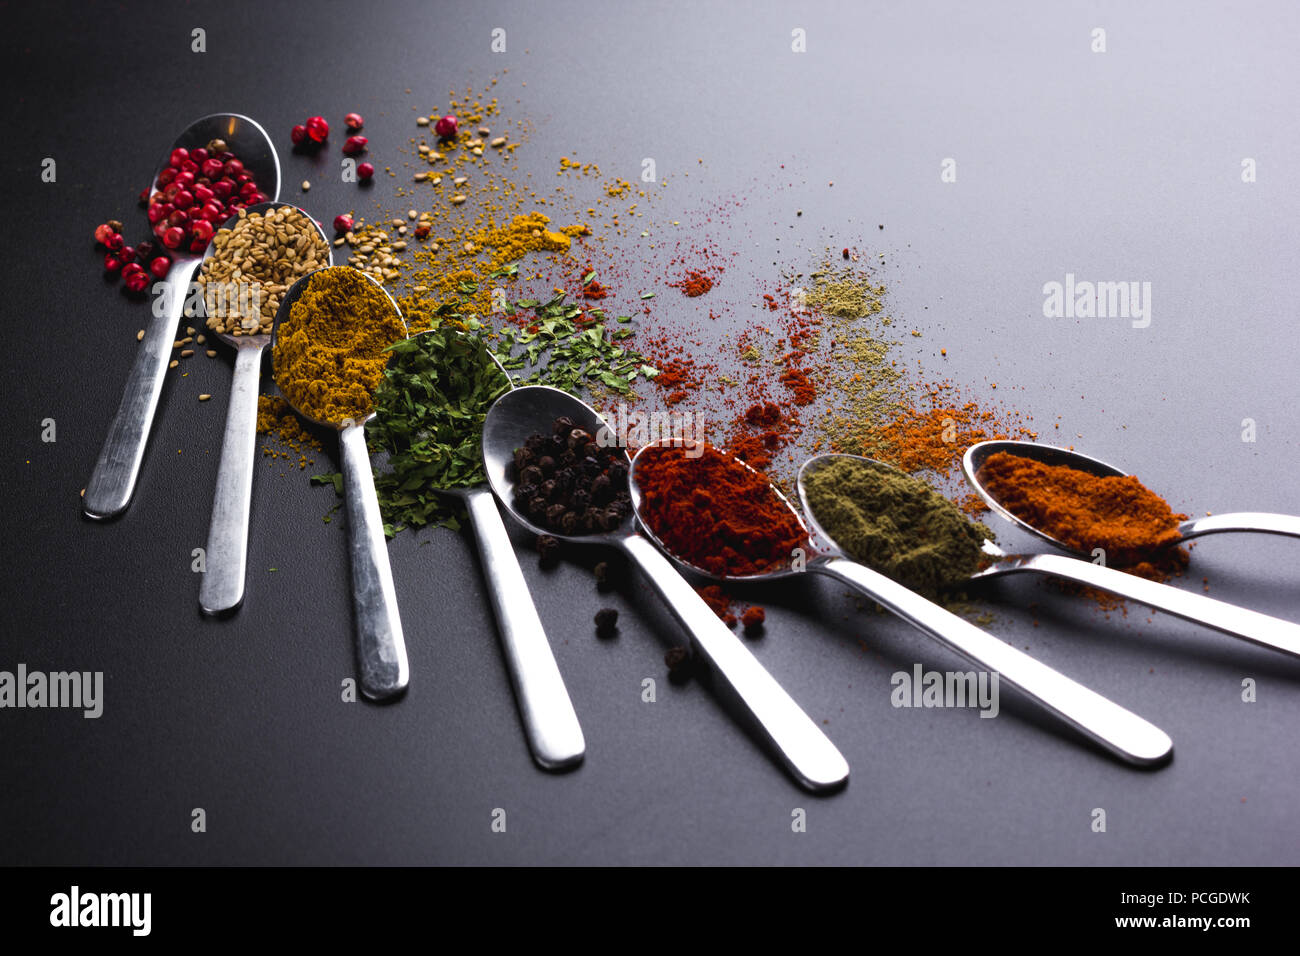 Composition of small spoons full of spices and condiments for cooking on a black background Stock Photo